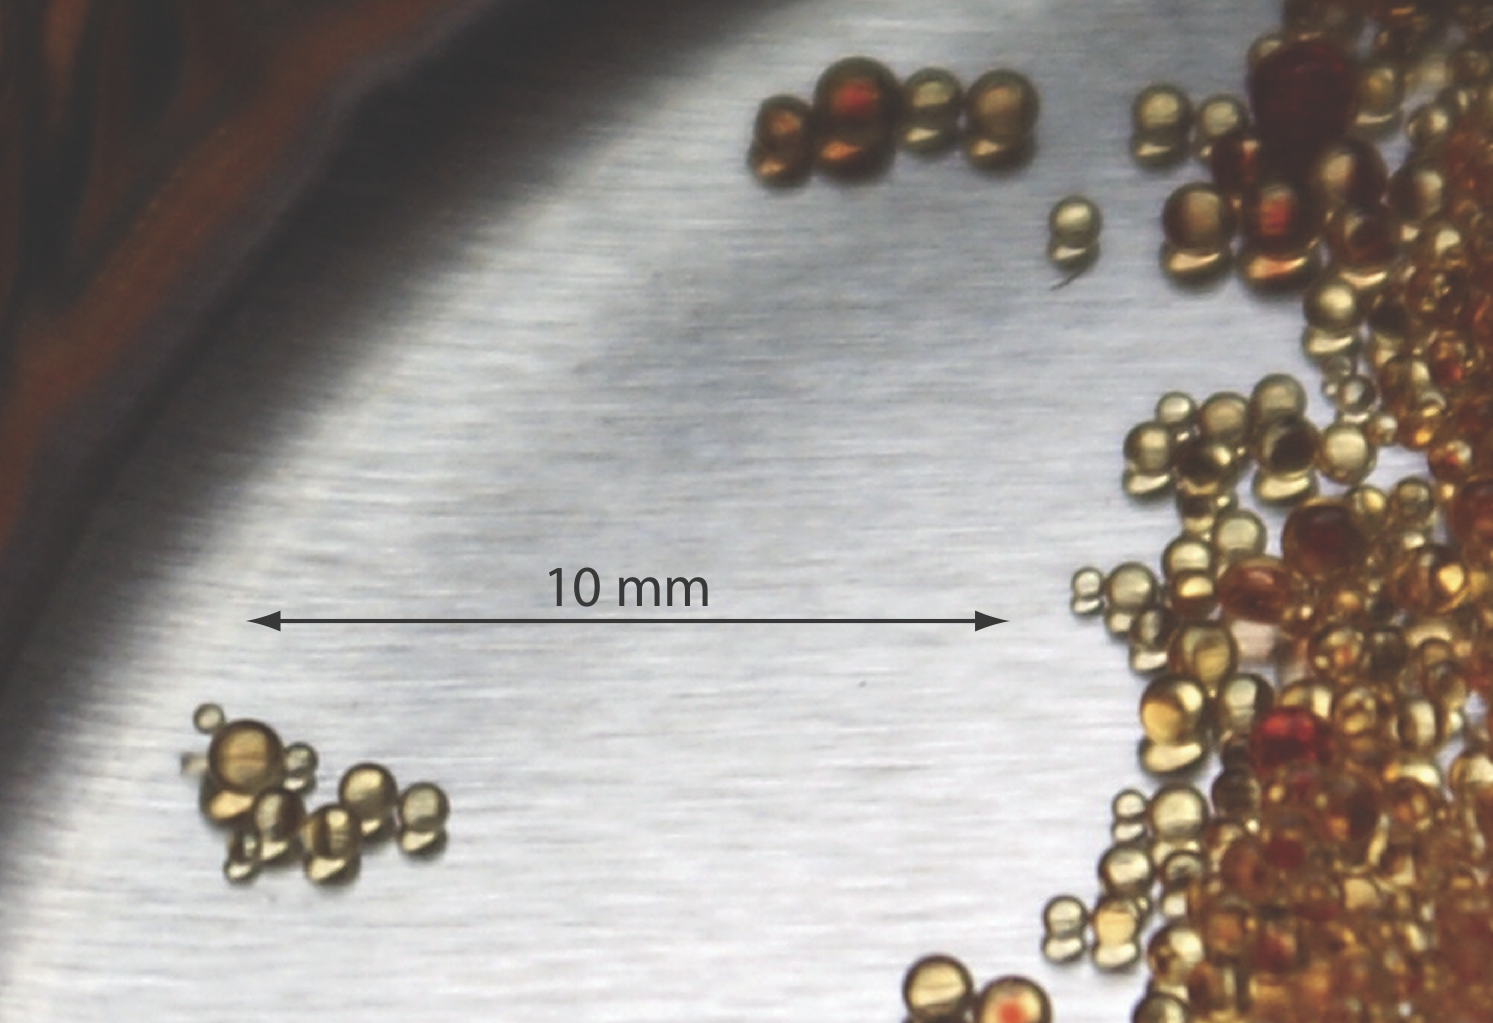 Example of an ion-exchange resin. The individual beads seen here range in size from approximately 300 µm to 850 µm in diameter.